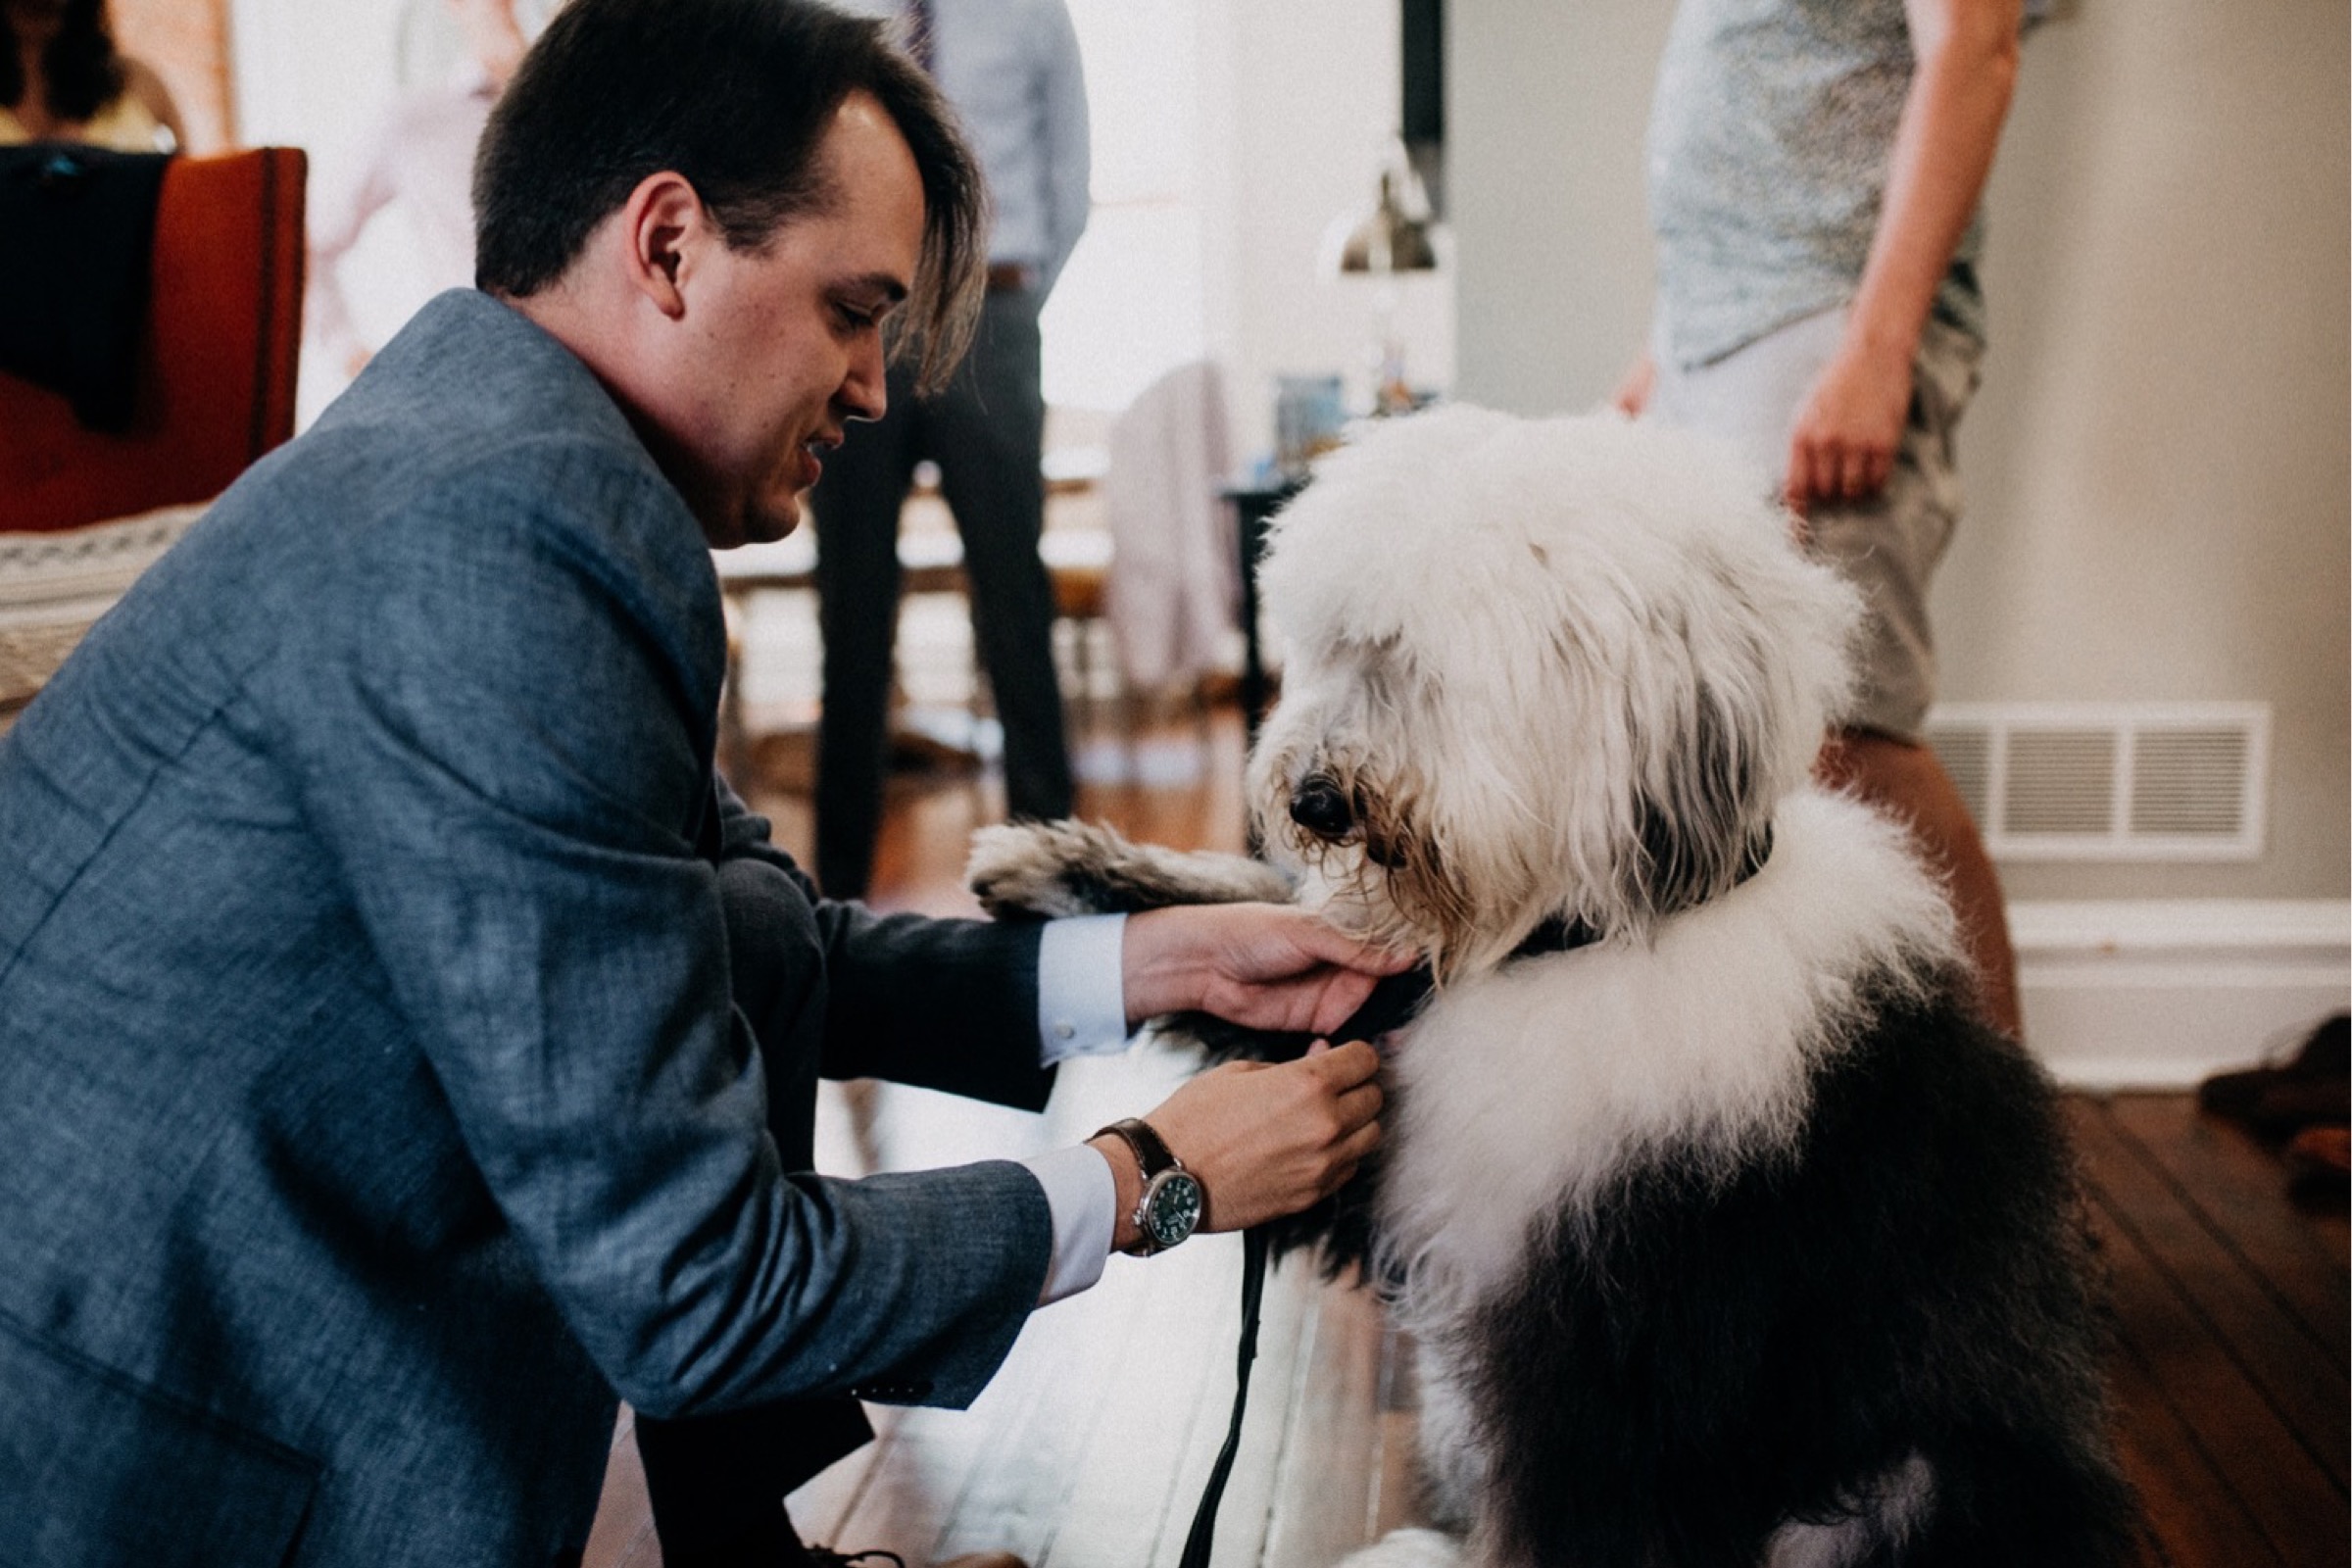 groom getting his dog ready during the getting ready portion of his wedding day timeline